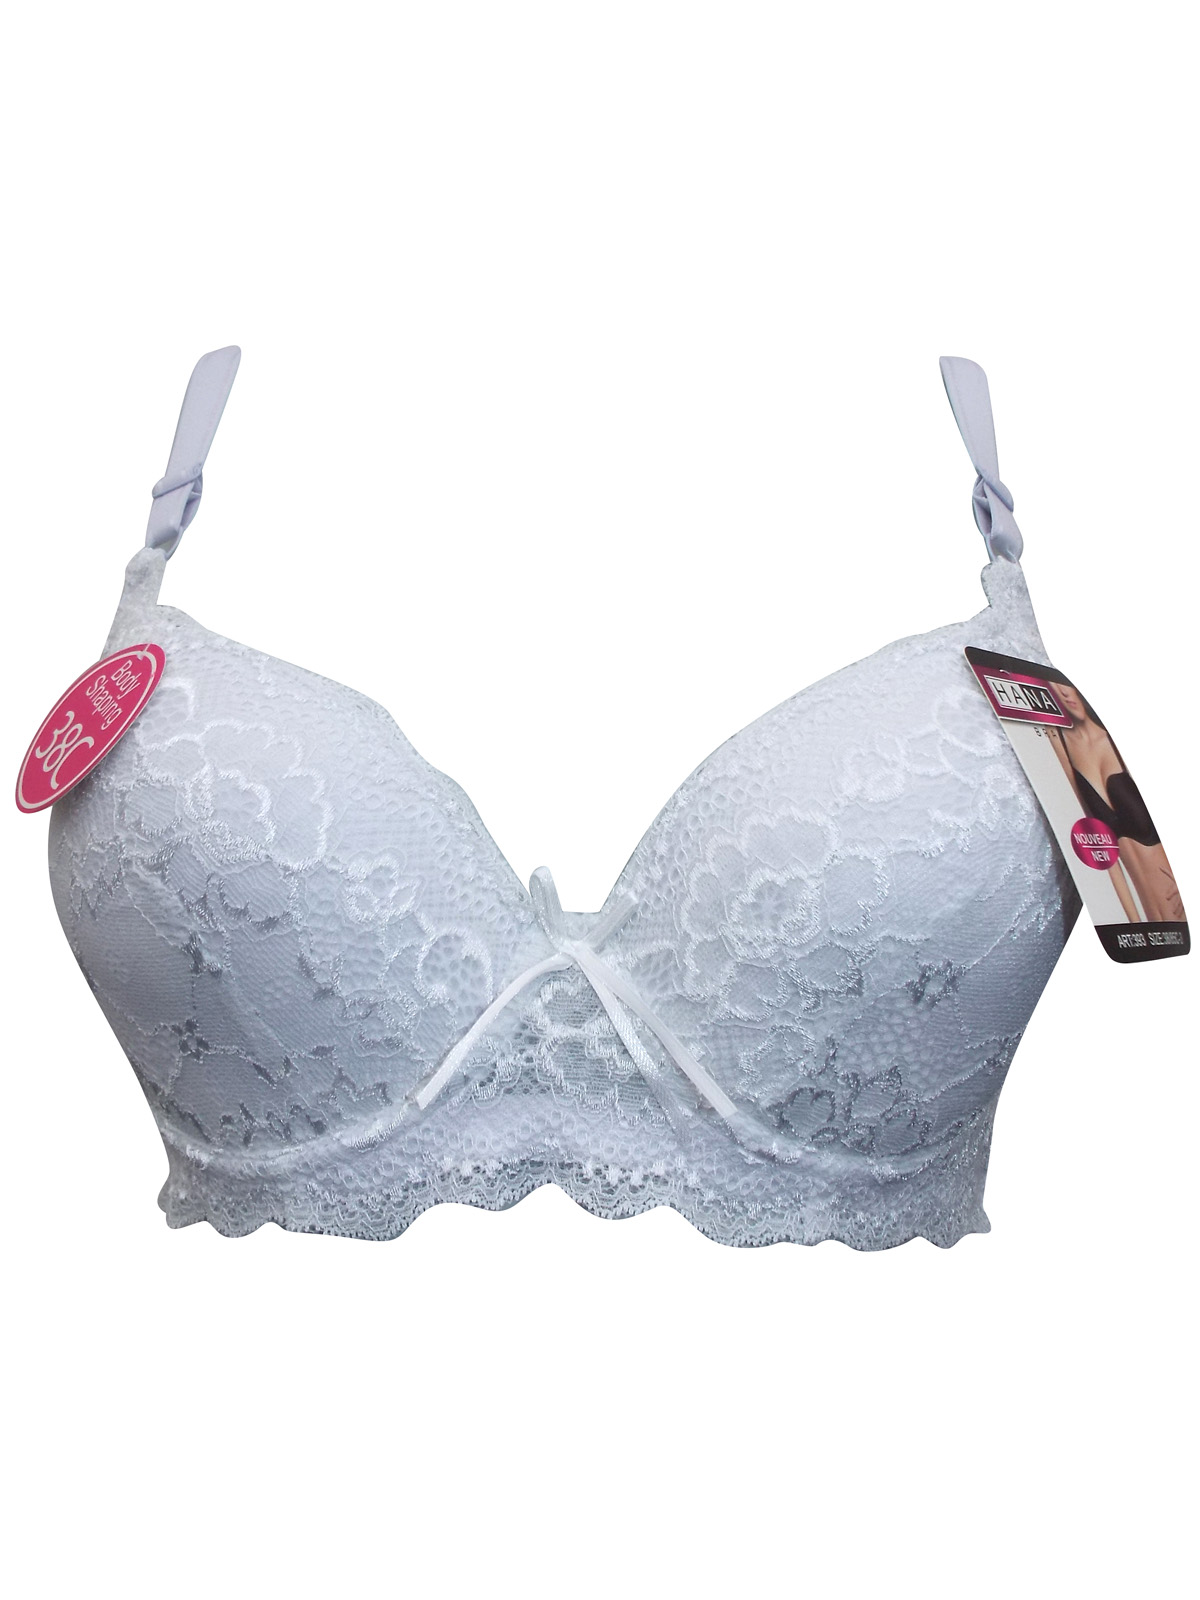 Avenue PLUS SIZE BRA SMTH CARESS PRT IN NAVY FLORAL, SIZE 38C at